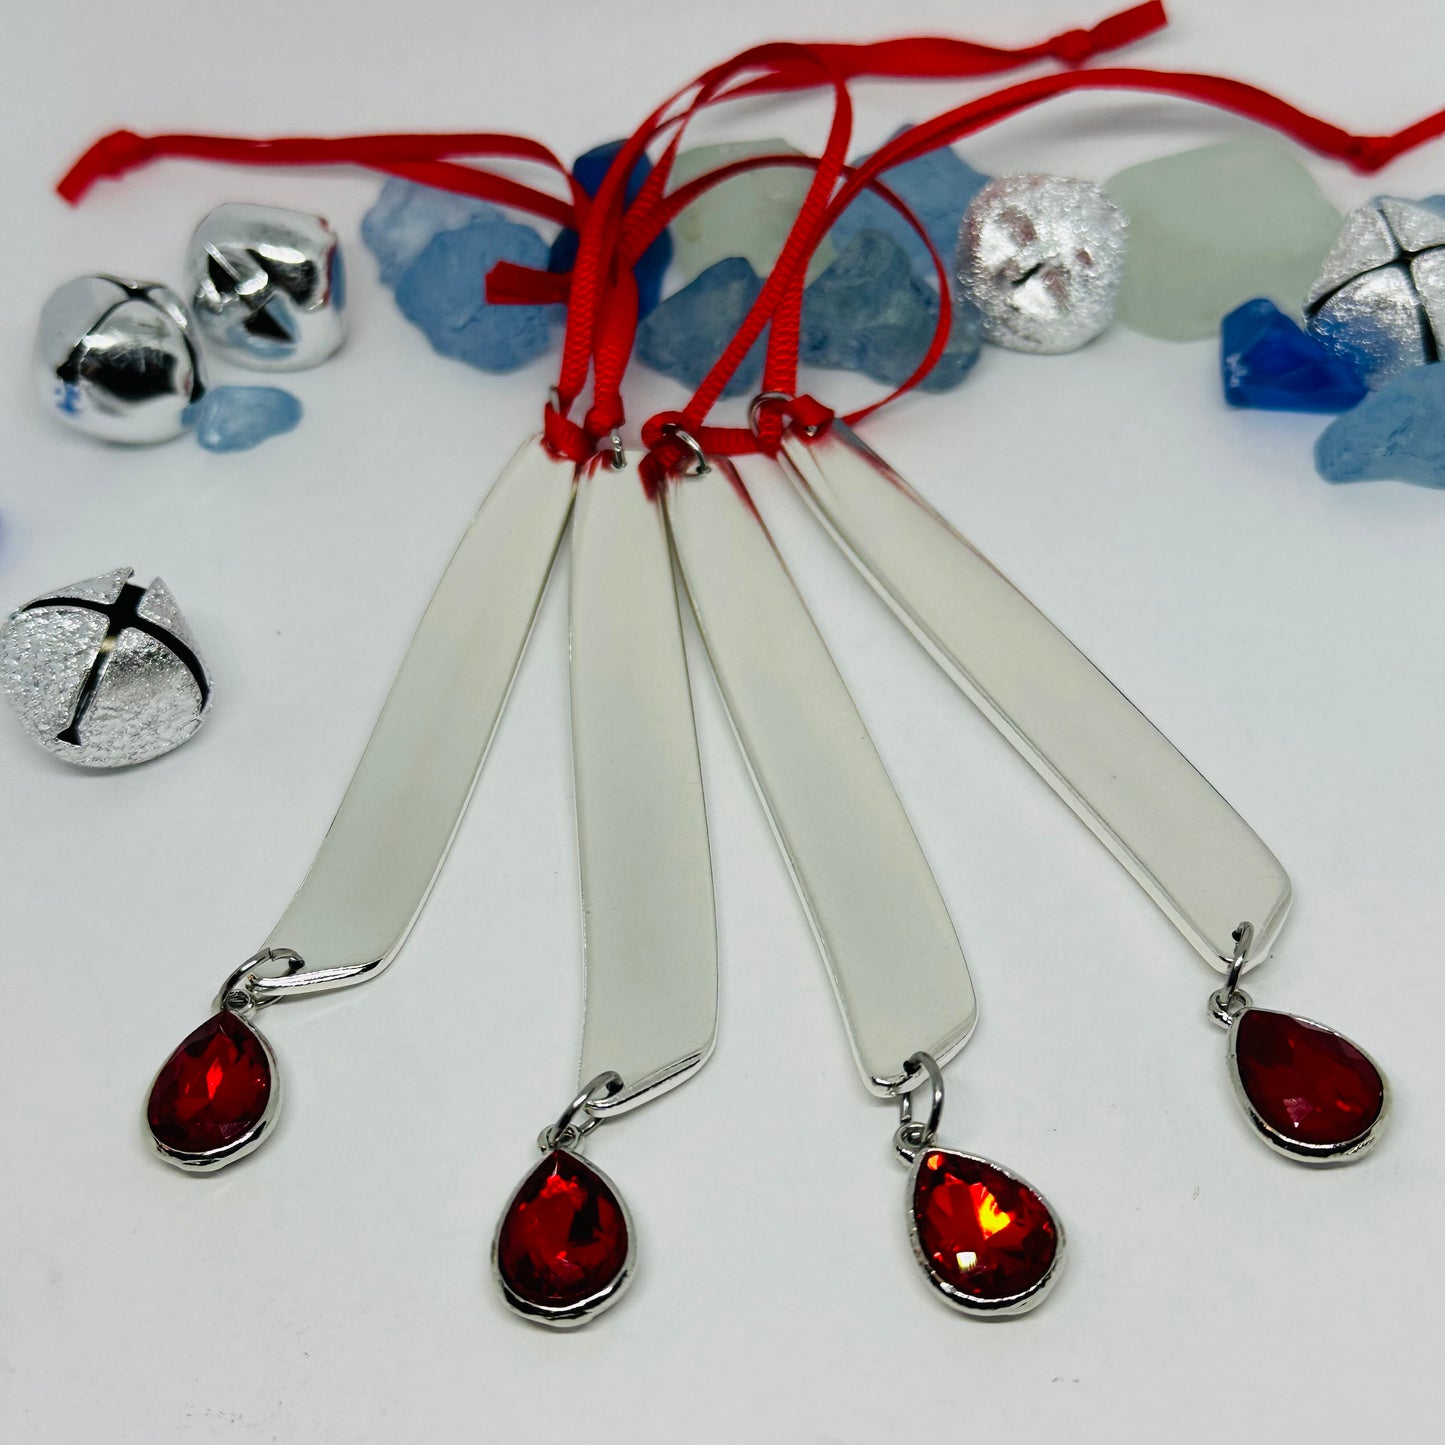 Vintage South Seas 1955 Icicle Ornaments with Red Teardrop Charms | Limited Edition Holiday Decor | Window Charm | Garnet Ruby